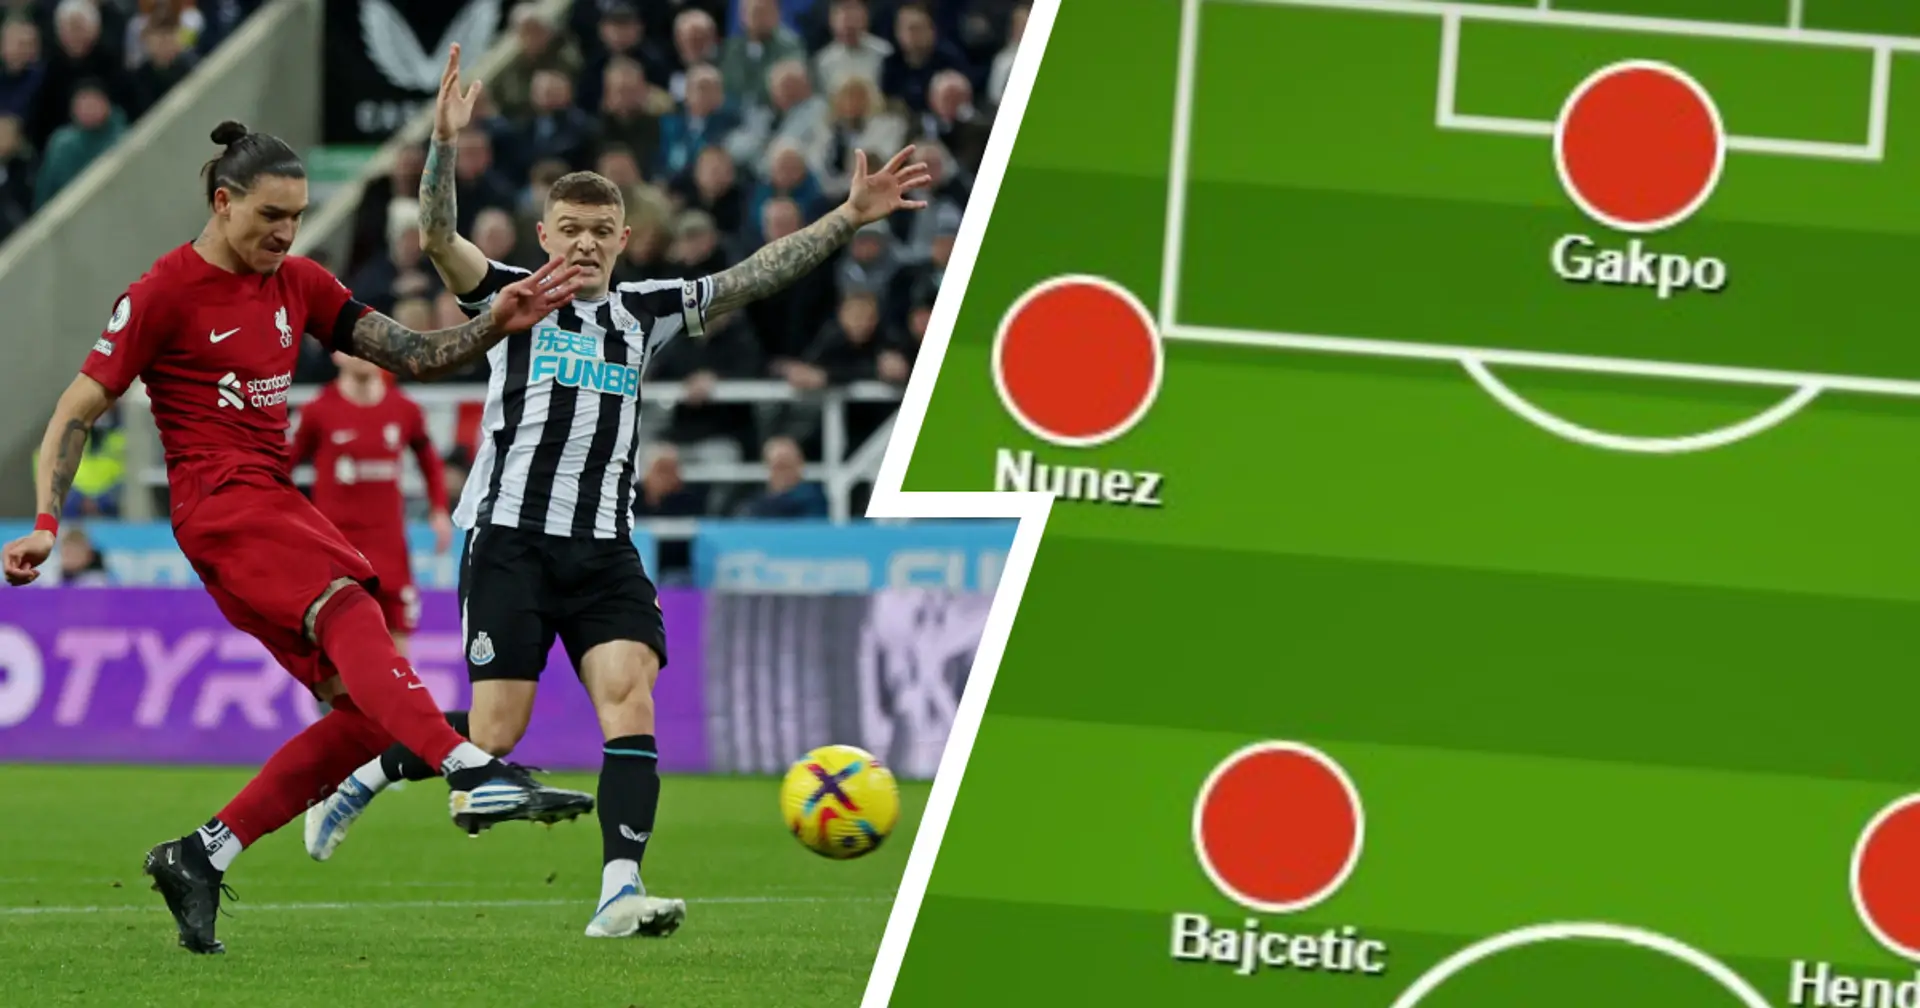 Liverpool's biggest strength in Newcastle win shown in lineup - it's not goalscorers